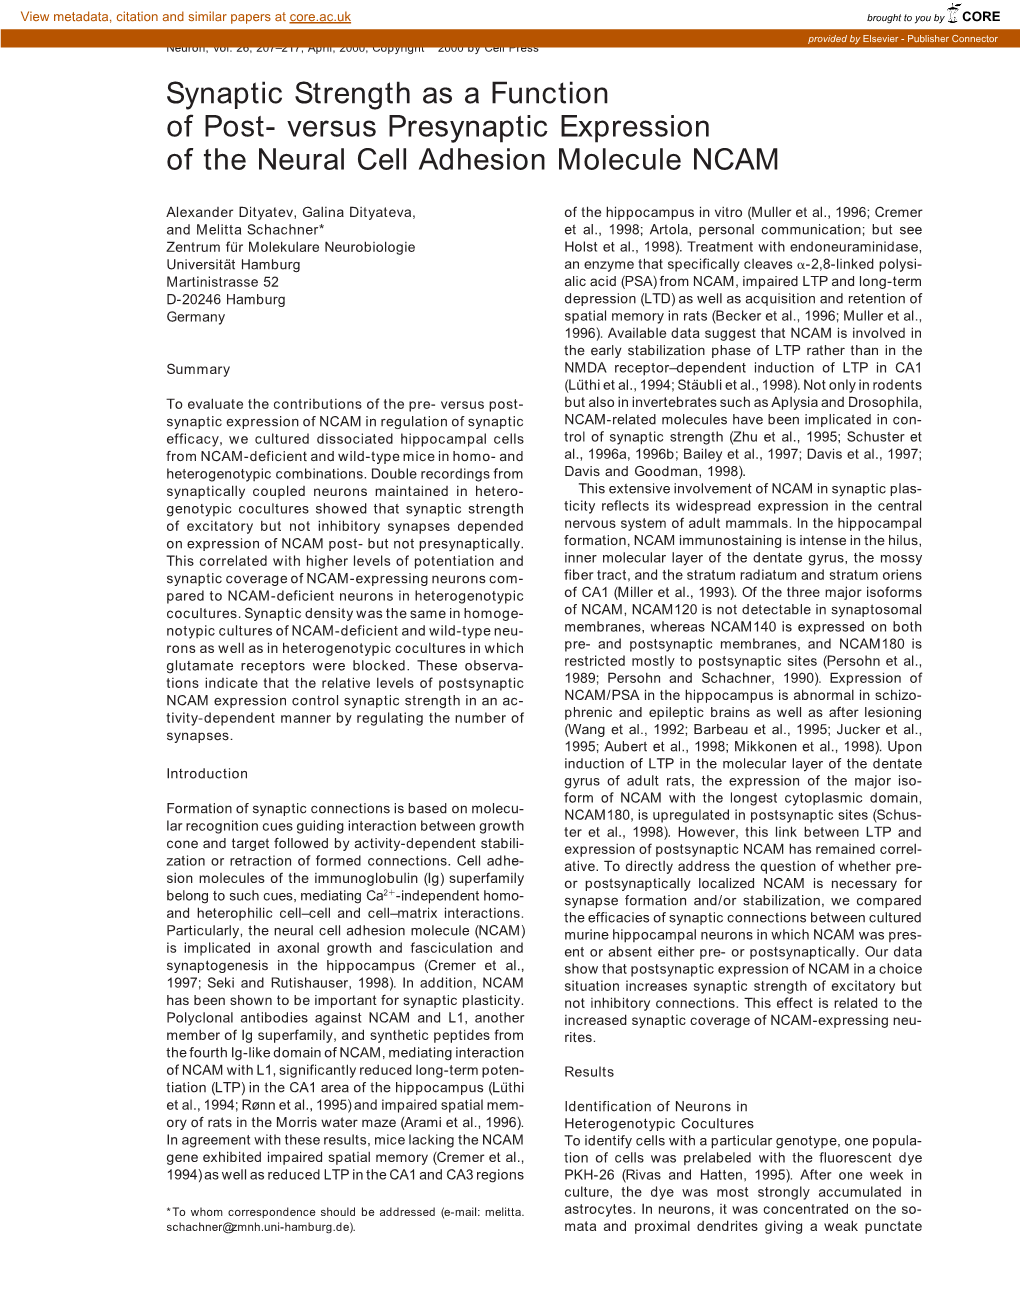 Versus Presynaptic Expression of the Neural Cell Adhesion Molecule NCAM